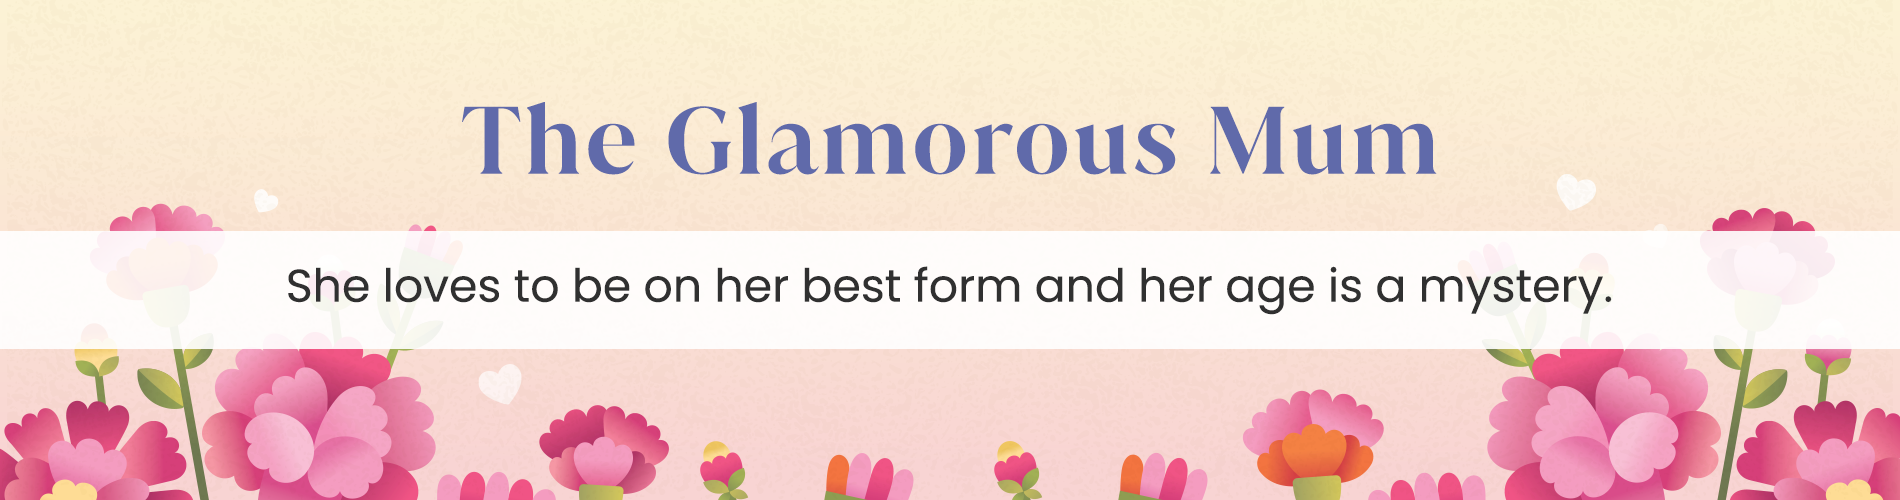 Type1-The Glamorous Mum.png__PID:9c07a645-8113-4814-9311-07d8b98725d0